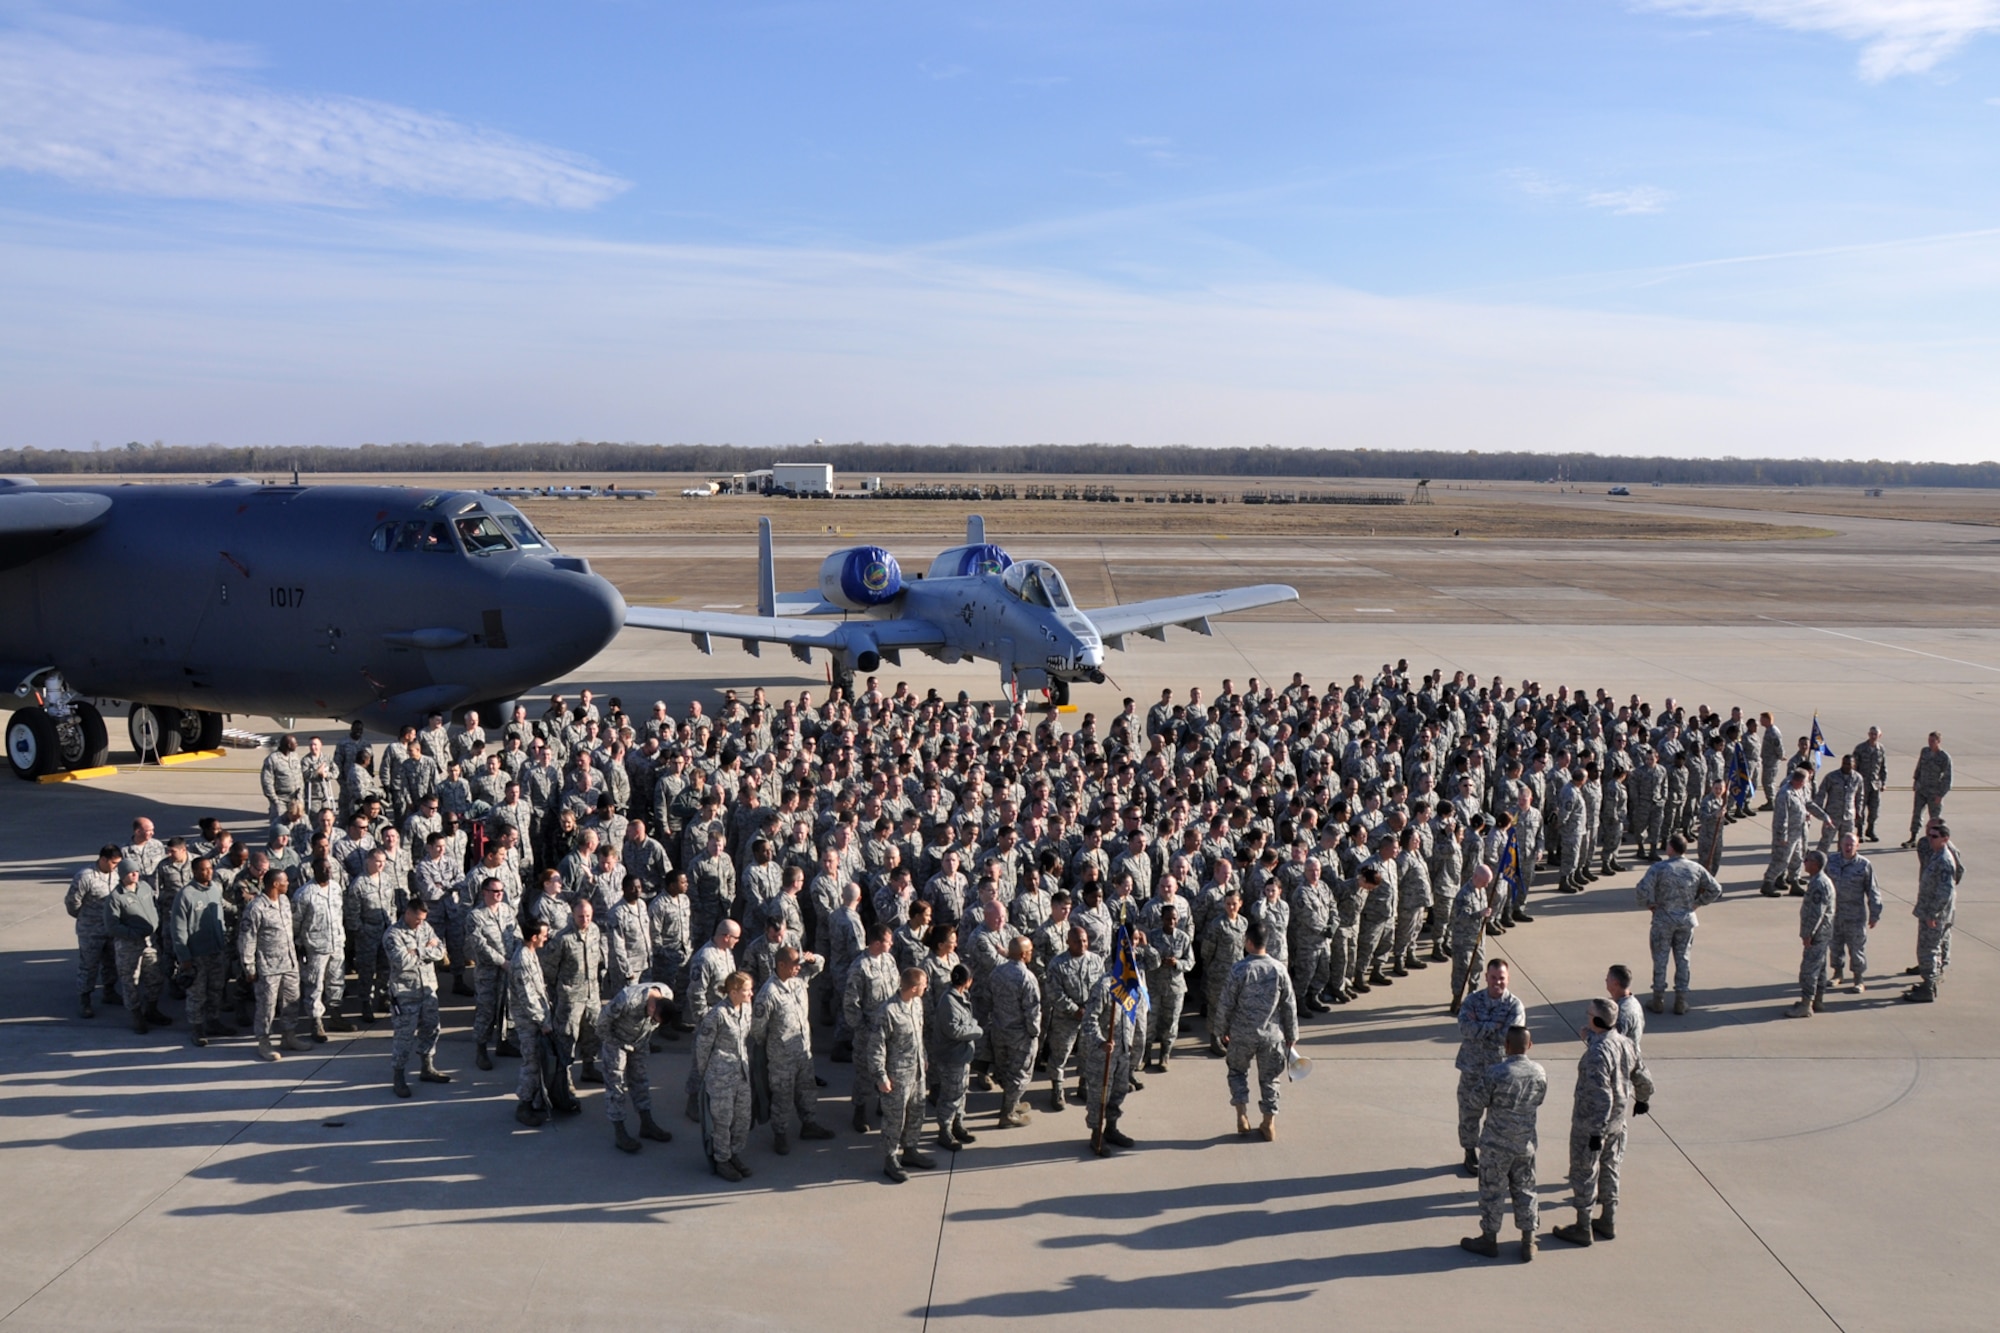 The 917th Maintenance Group gathers for photos on the ramp at Barksdale Air Force Base, La., Dec. 5, 2010. Group, squadron and flight photos were taken for historical purposes during the December Unit Training Assembly weekend, since the 917th Wing will soon be deactivated and these will be the last photos taken as 917th Wing. The wing will be deactivated in ceremonies Jan. 8, 2010 and the 307th Bomb Wing will be reactivated. (U.S. Air Force photo /Tech. Sgt. Jeff Walston)